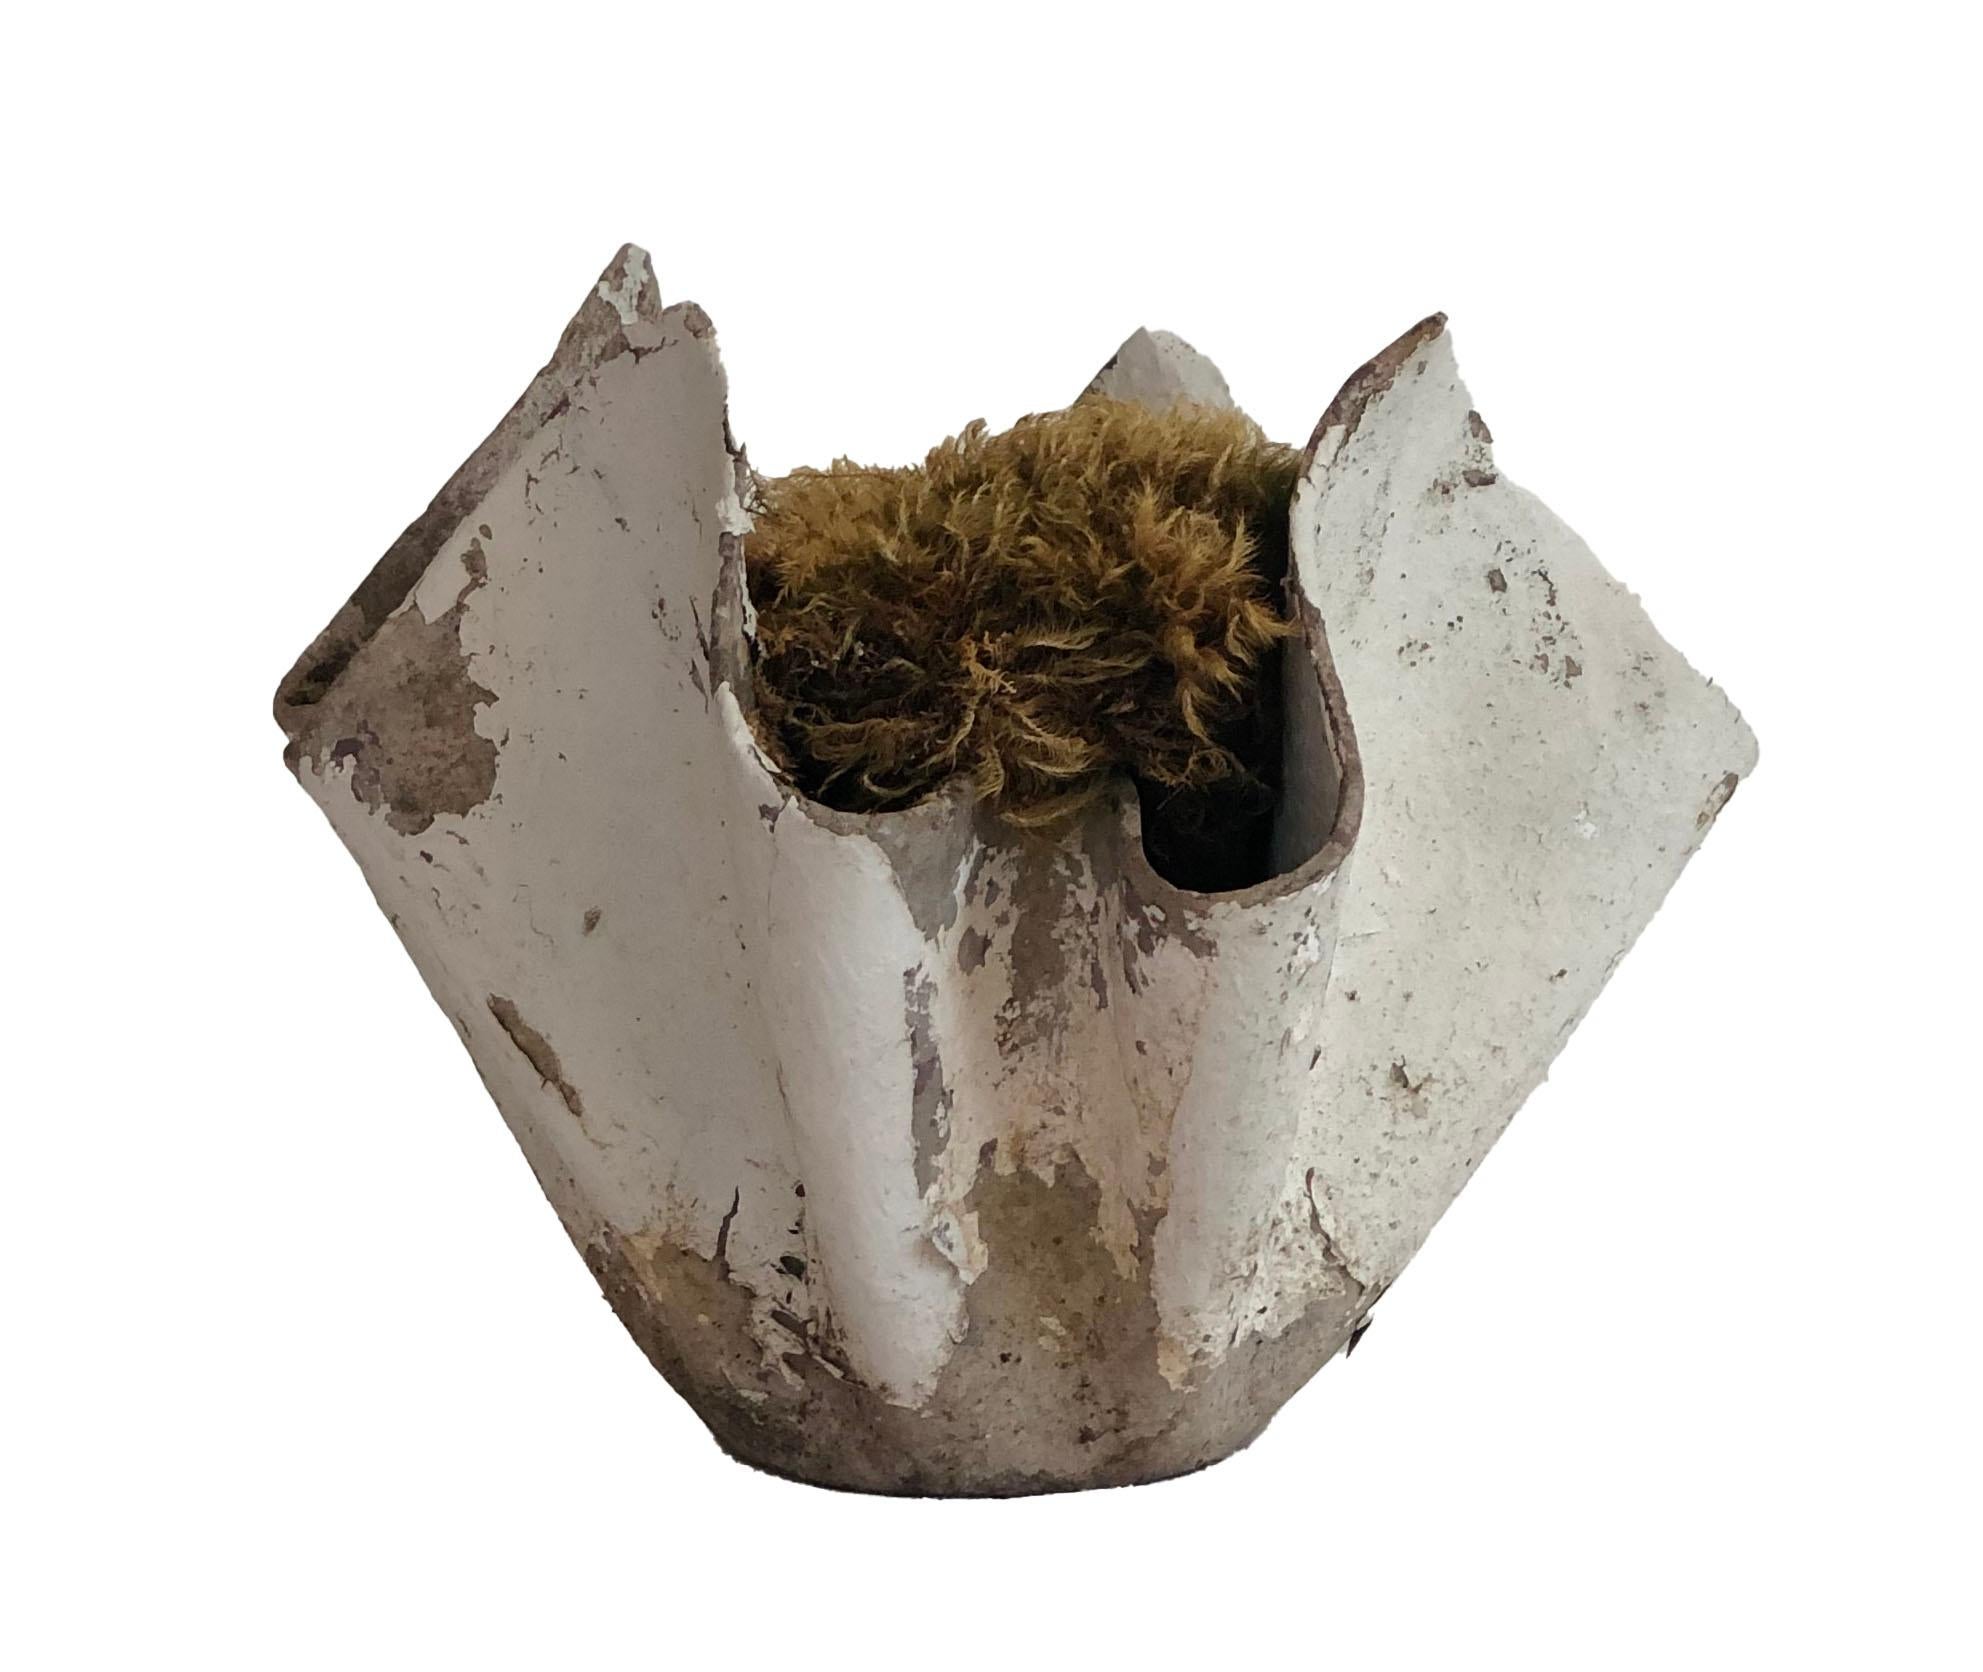 Small and unusual cement Willy Guhl handkerchief bowl planter. This bowl looks beautiful with an orchid or succulent with moss. Gorgeous planter for indoors or outside.